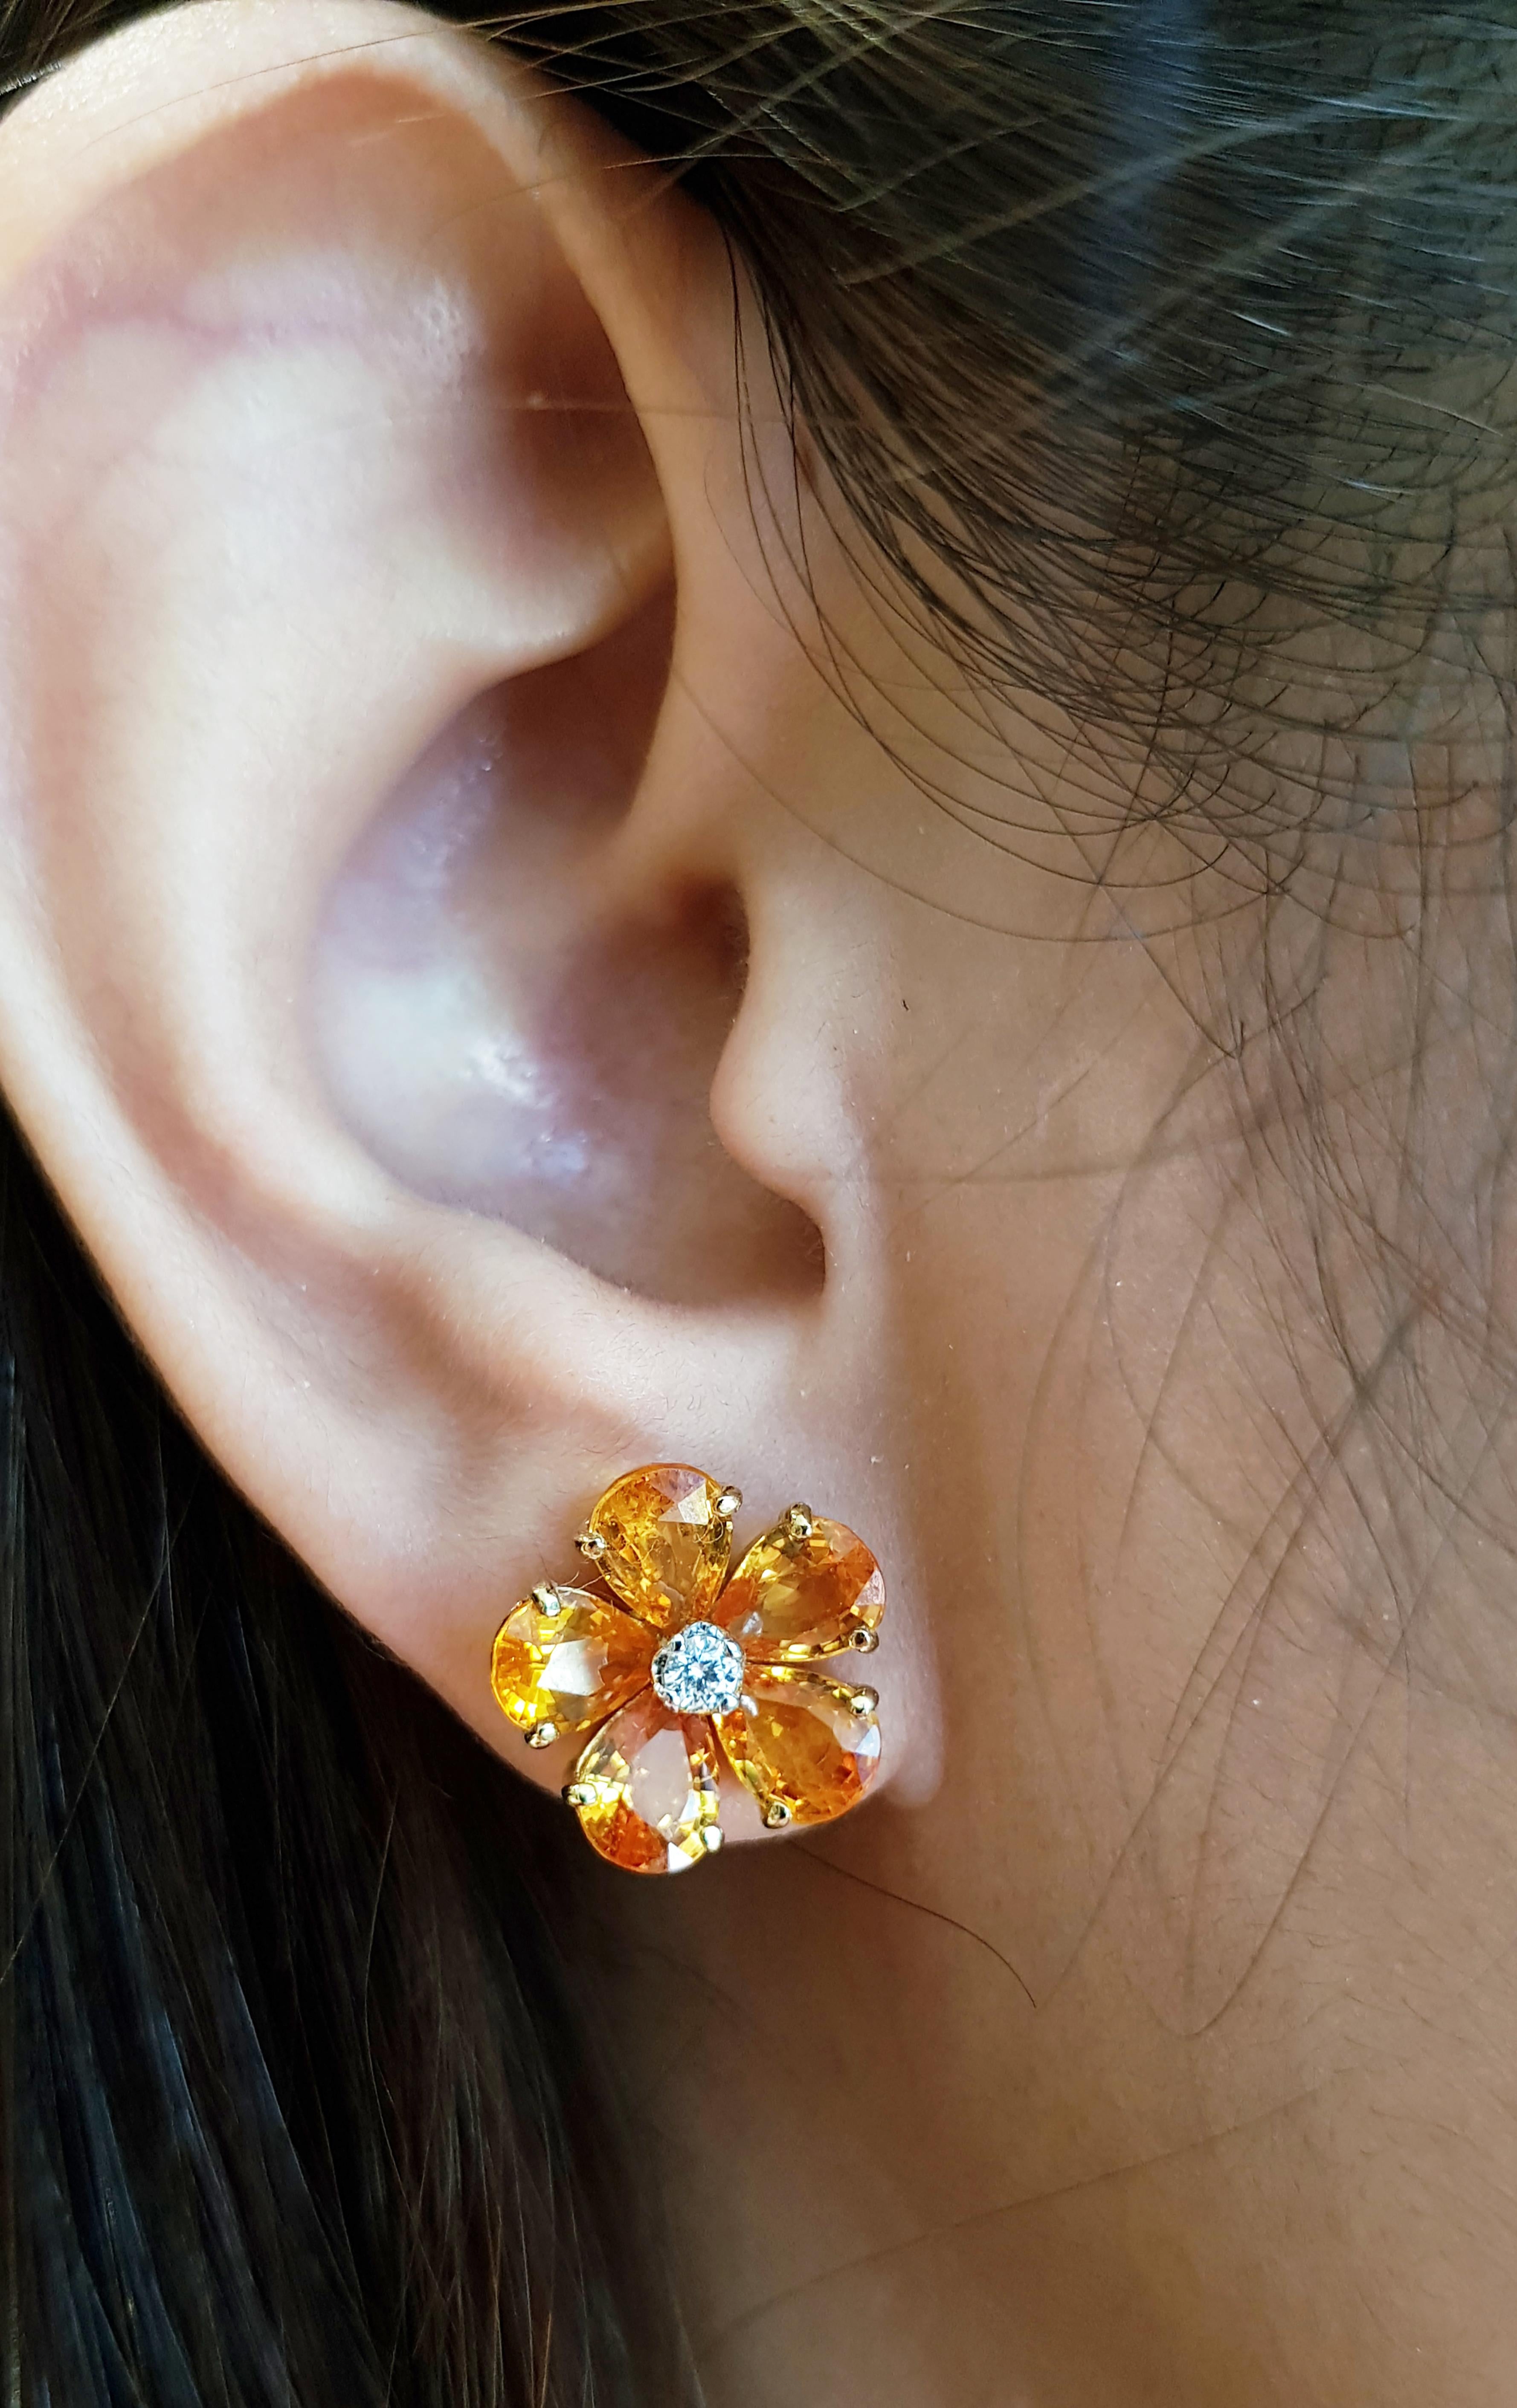 Yellow Sapphire 9.53 carats with Diamond 0.12 carat Earrings set in 18 Karat Gold Settings

Width:  1.4 cm 
Length: 1.4 cm
Total Weight: 6.25 grams

